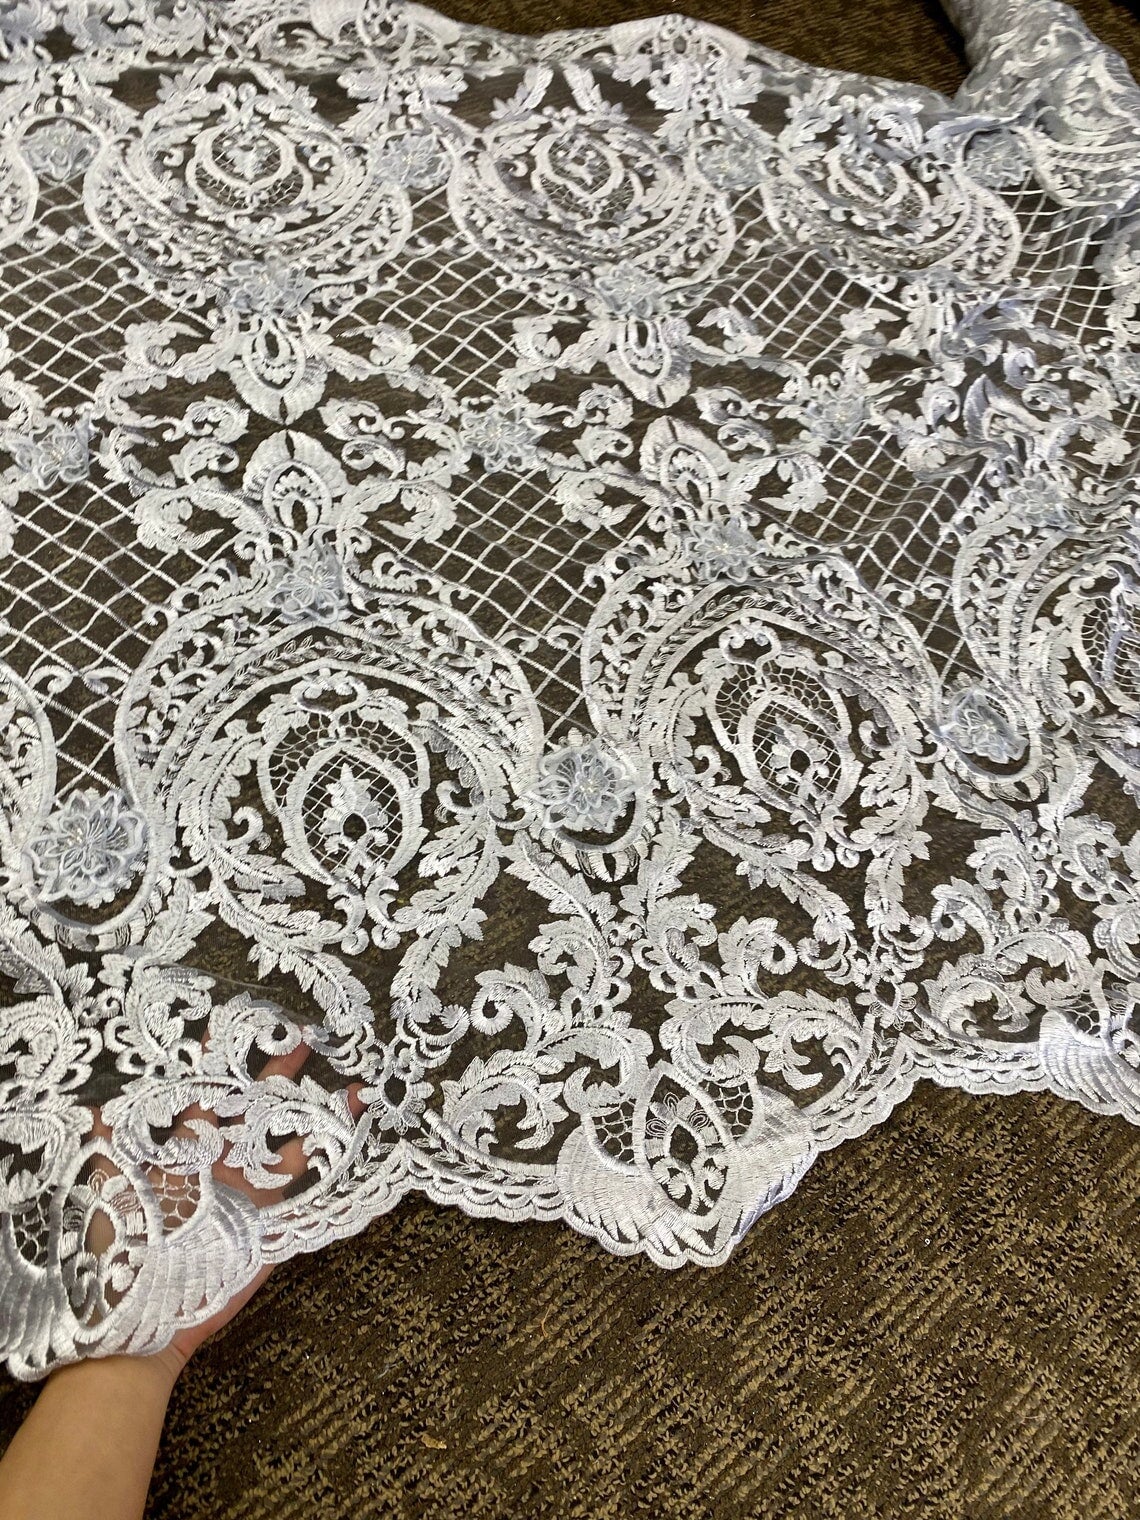 Silver Scallop Embroidery Lace, light silver Scallop Embroidery Lace, dark silver Scallop Embroidery Lace, Scallop Embroidery Lace for woman, Scallop Embroidery Lace for bride, Scallop Embroidery Lace for gown, Scallop Embroidery Lacein low price, premium Scallop Embroidery Lace, cheap Scallop Embroidery Lace